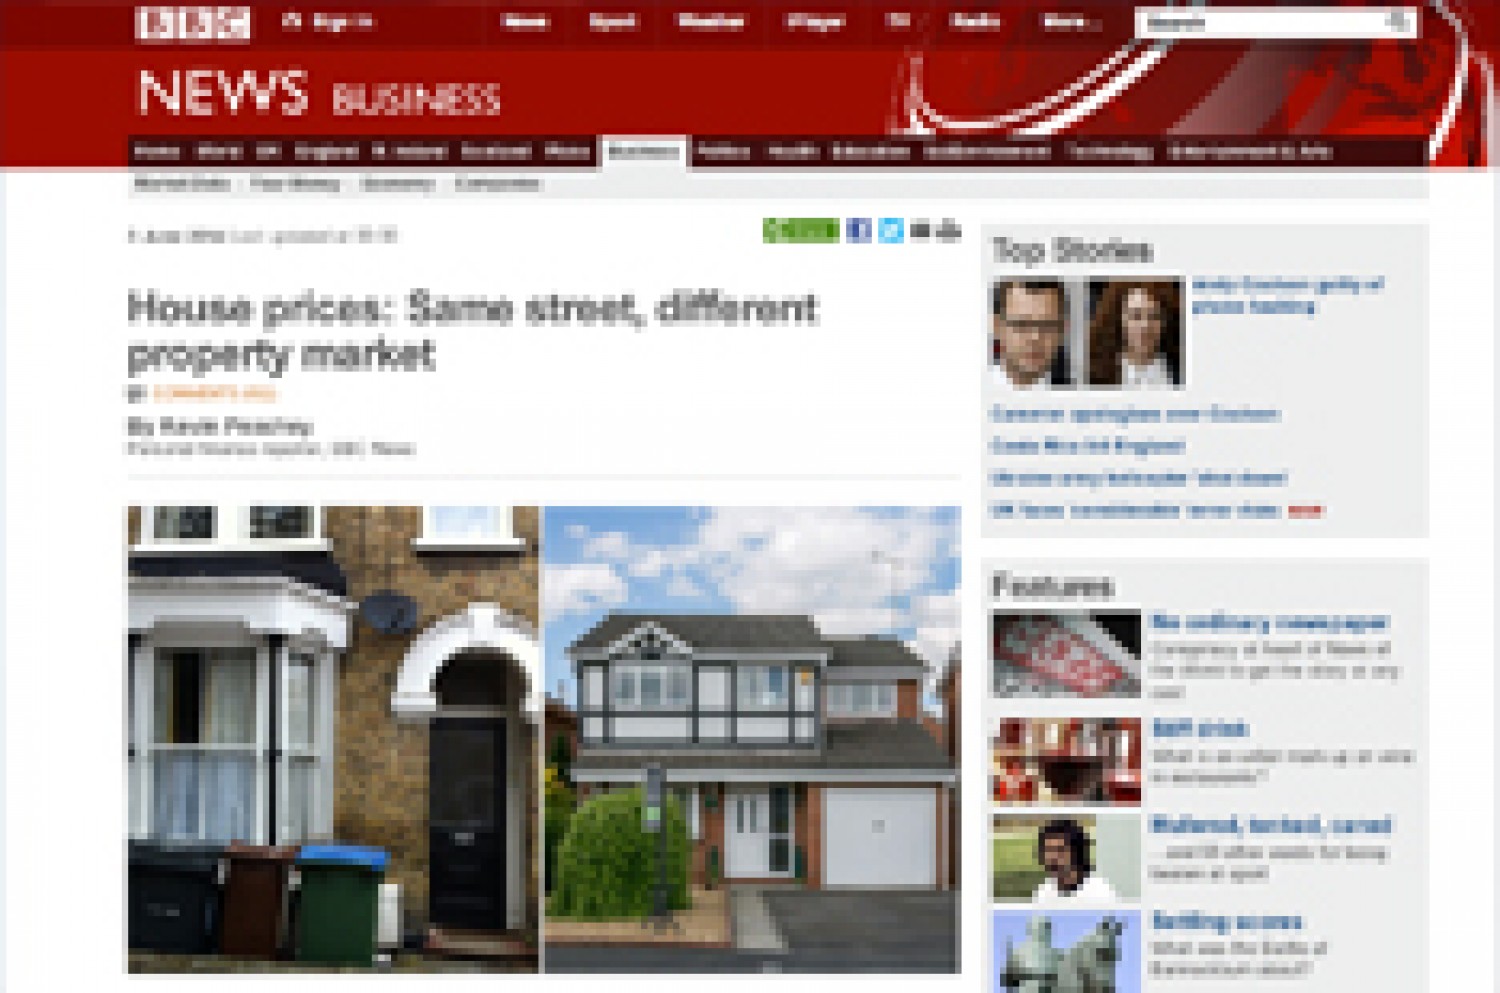  The BBC ask Andrew Regan for his view the property market. 